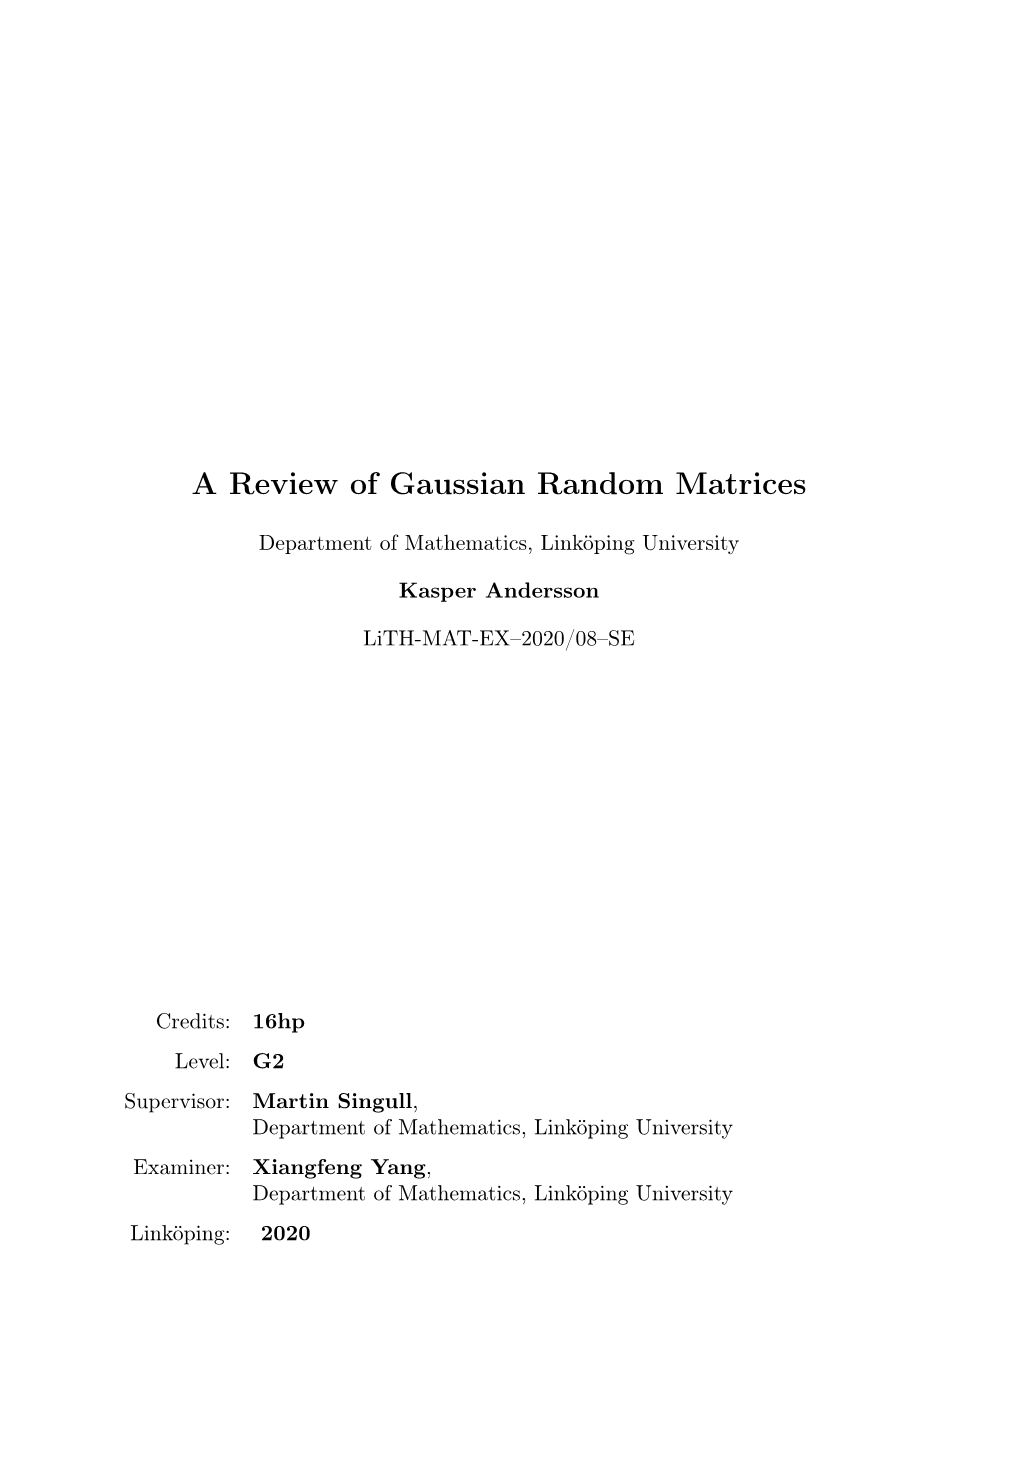 A Review of Gaussian Random Matrices